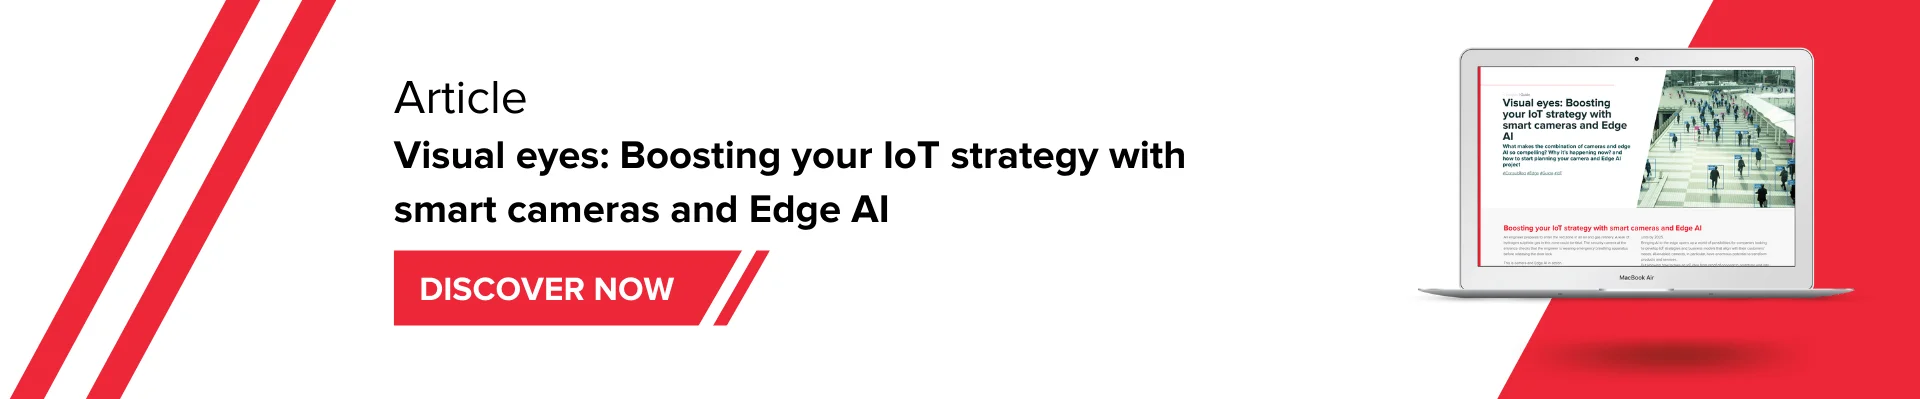 Article: Boosting your IoT strategy with smart cameras and Edge AI